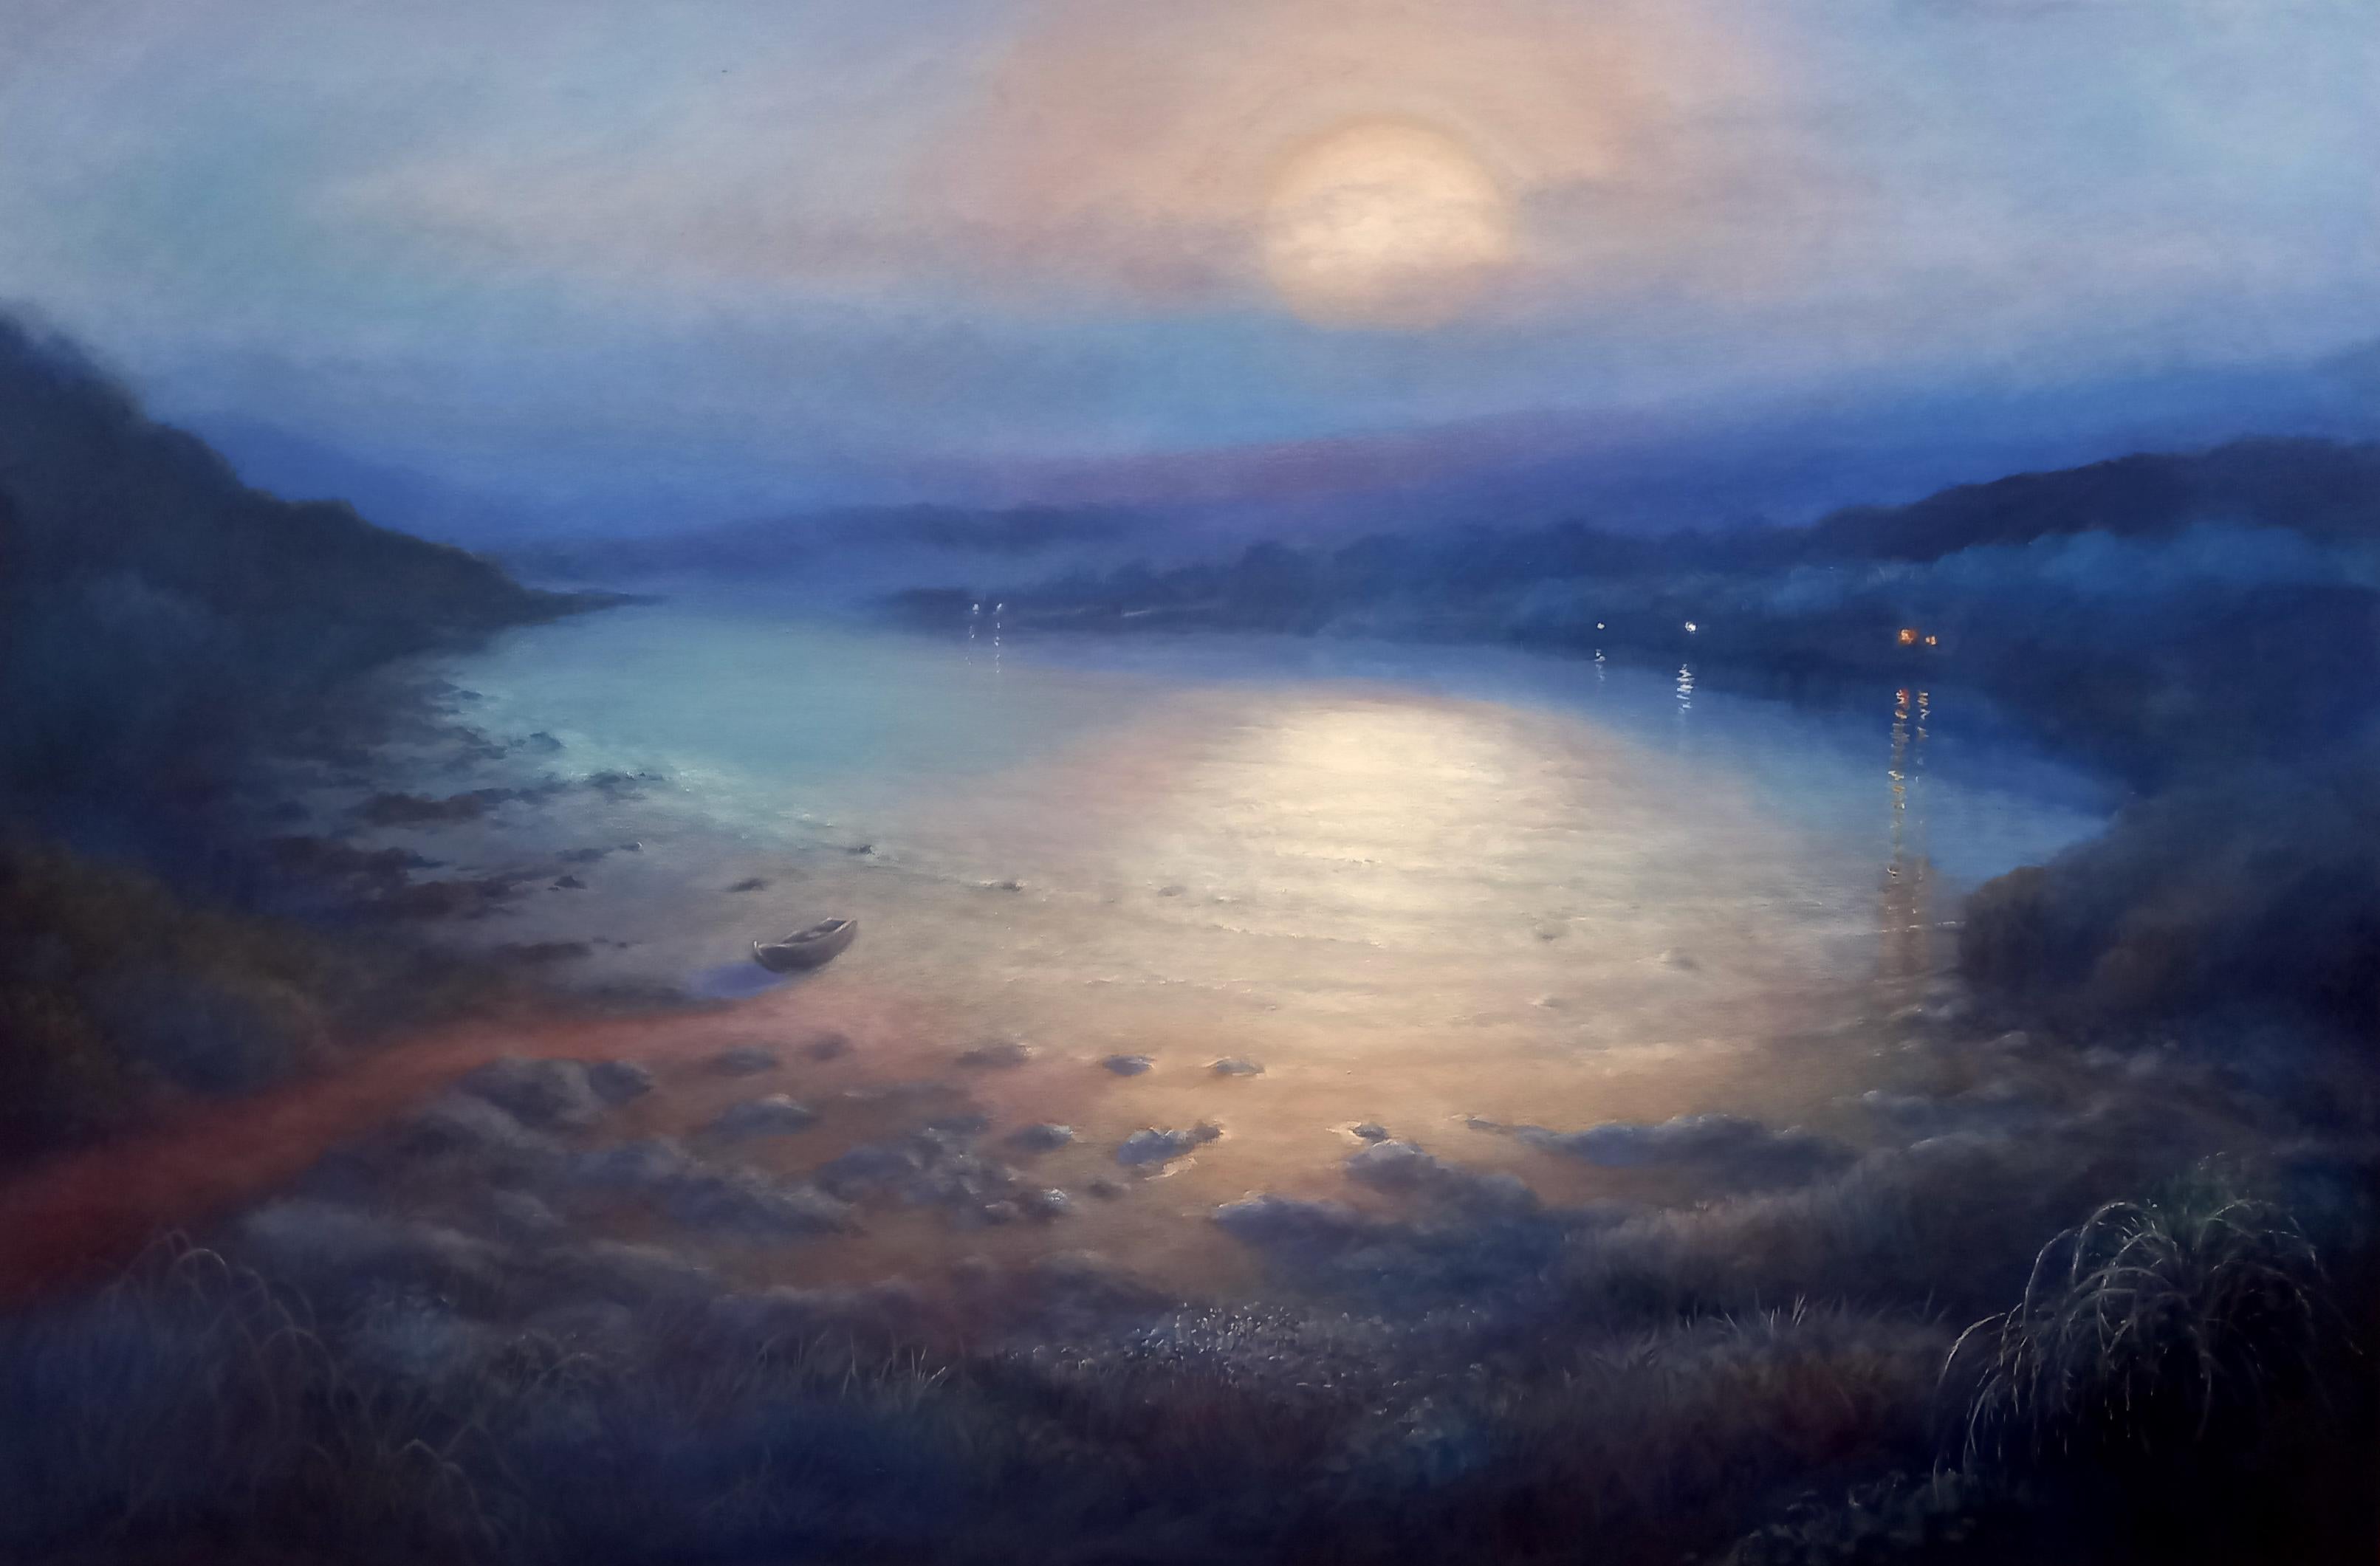 Moonlight Sonata
47.0 x 32.0 x 1.5, 7.0 lbs 
Oil Paint
Hand signed by artist 

Description:
An original oil painting by Lee Campbell. This Romantic style painting depicts an ocean landscape. The moon hovers above the composition, casting a soothing